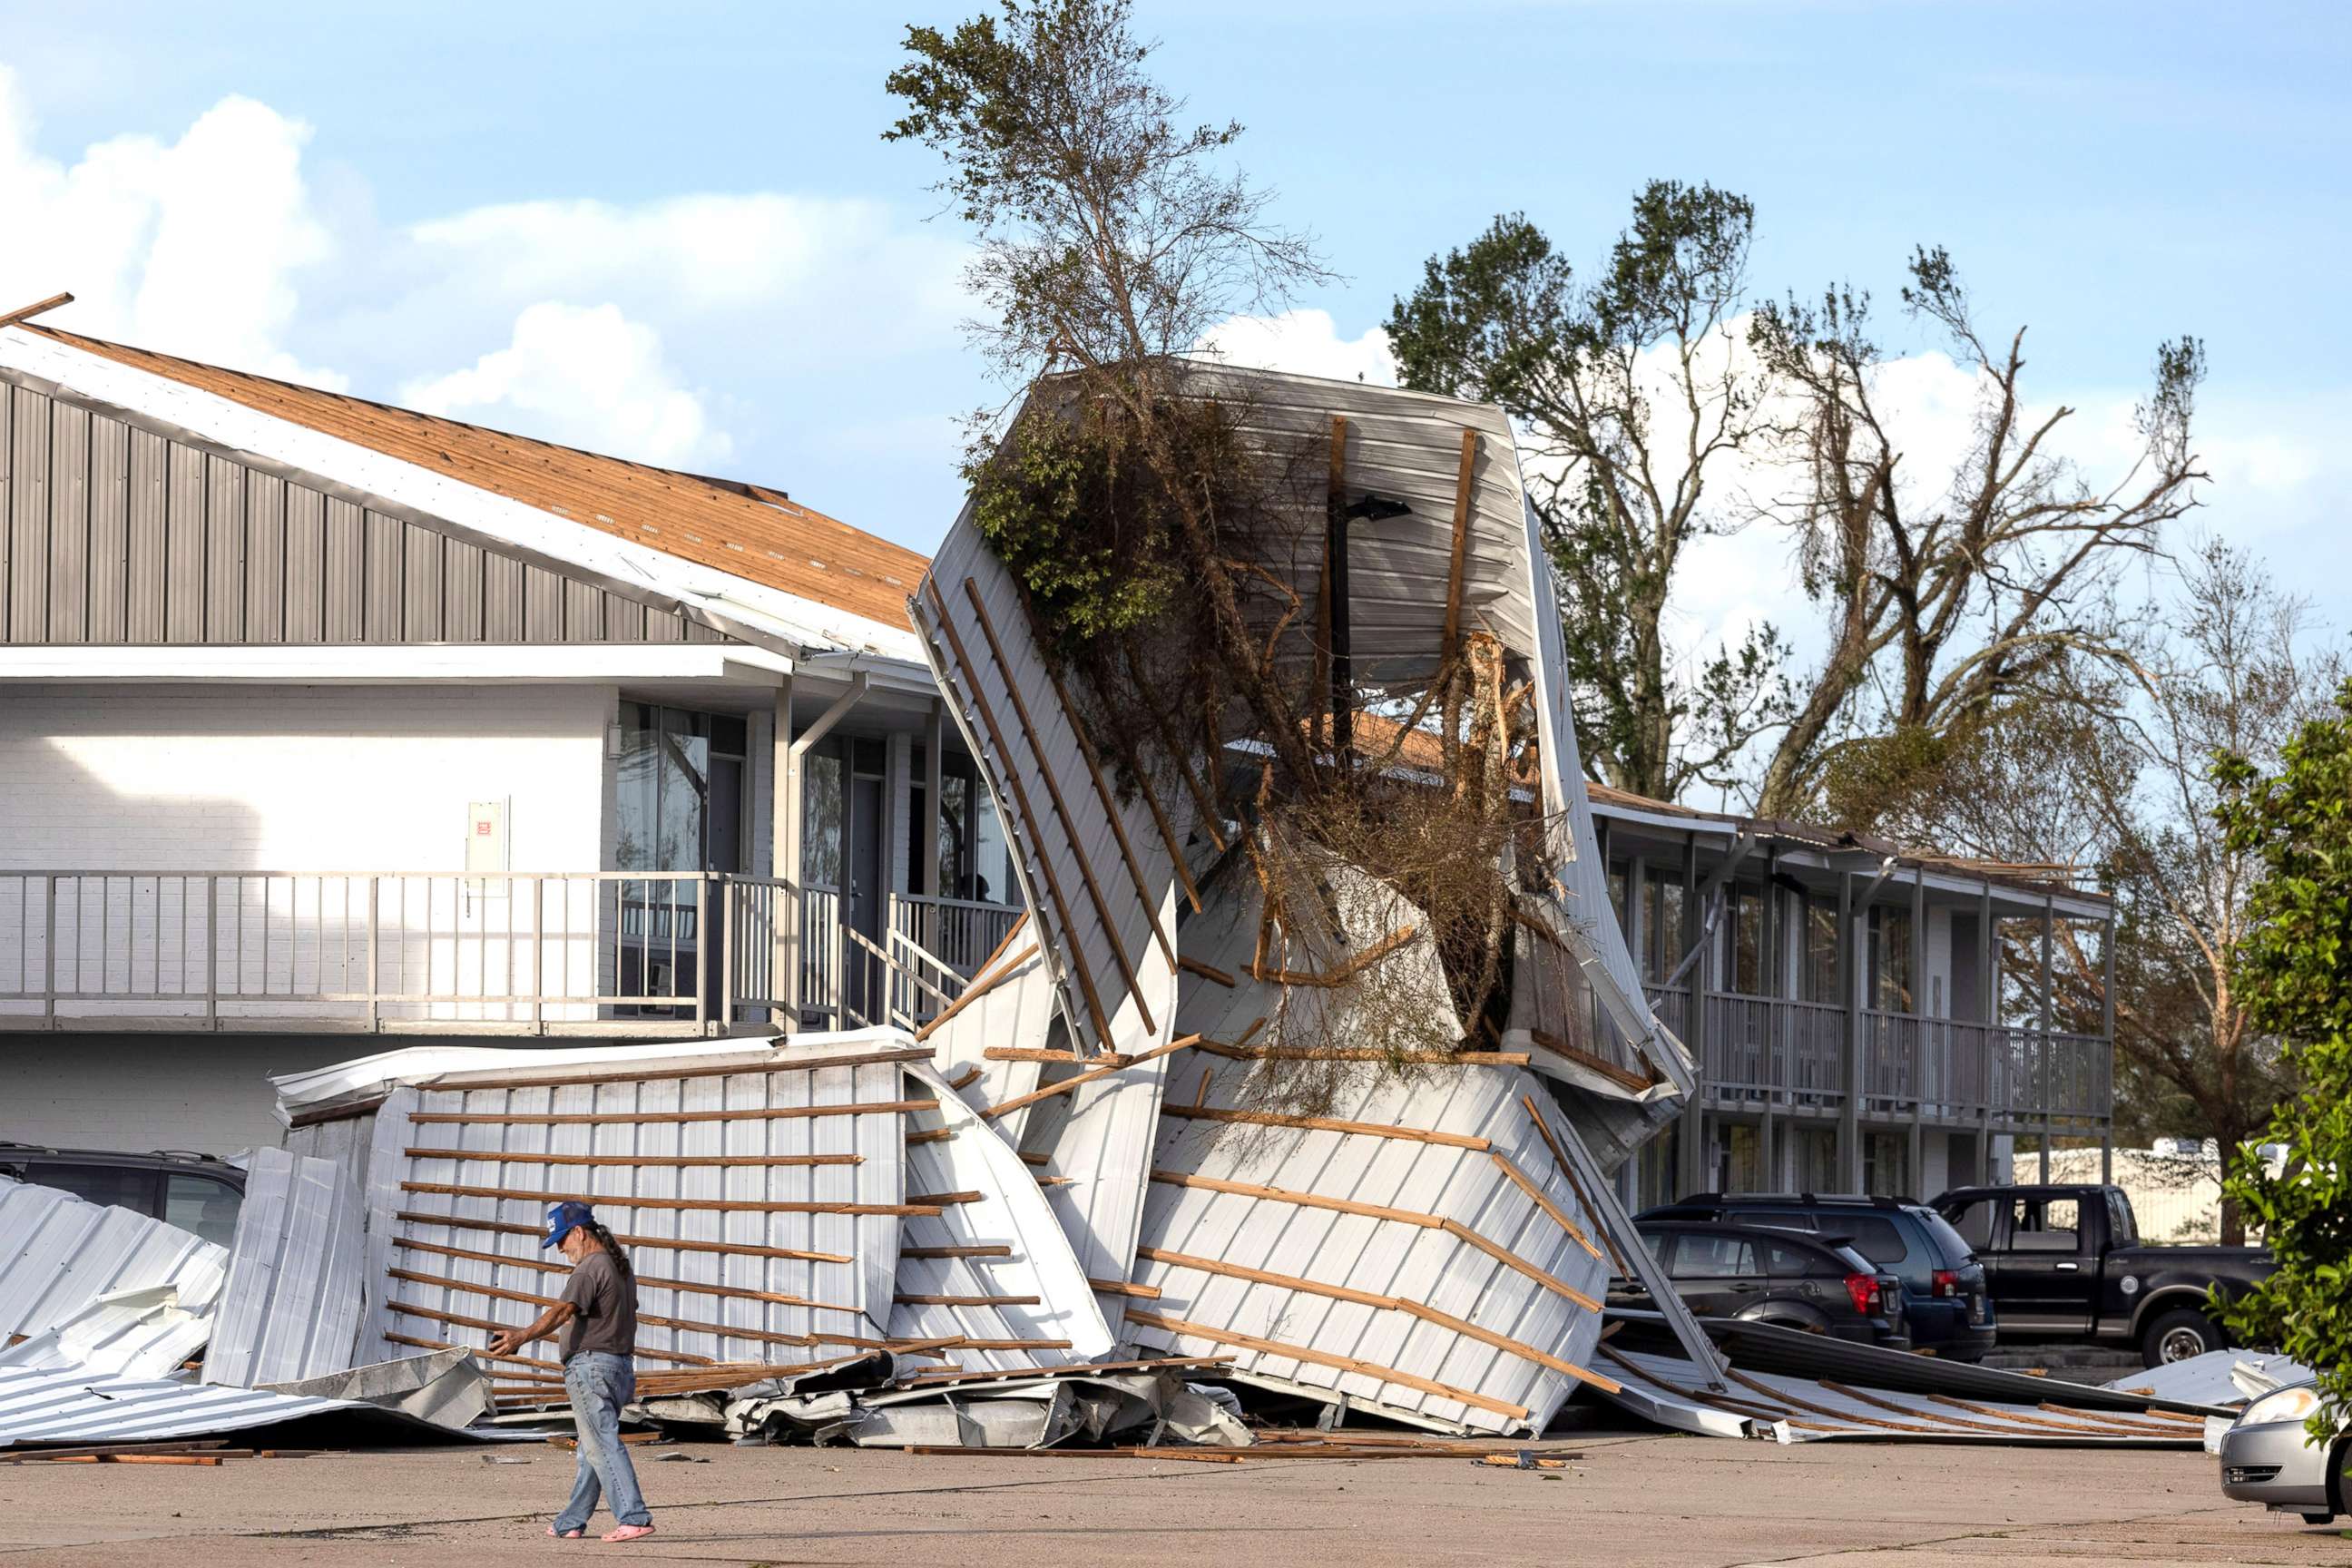 PHOTO: A local resident walks past destruction outside a hotel in the aftermath of Hurricane Ida in Houma, La., Aug. 30, 2021.